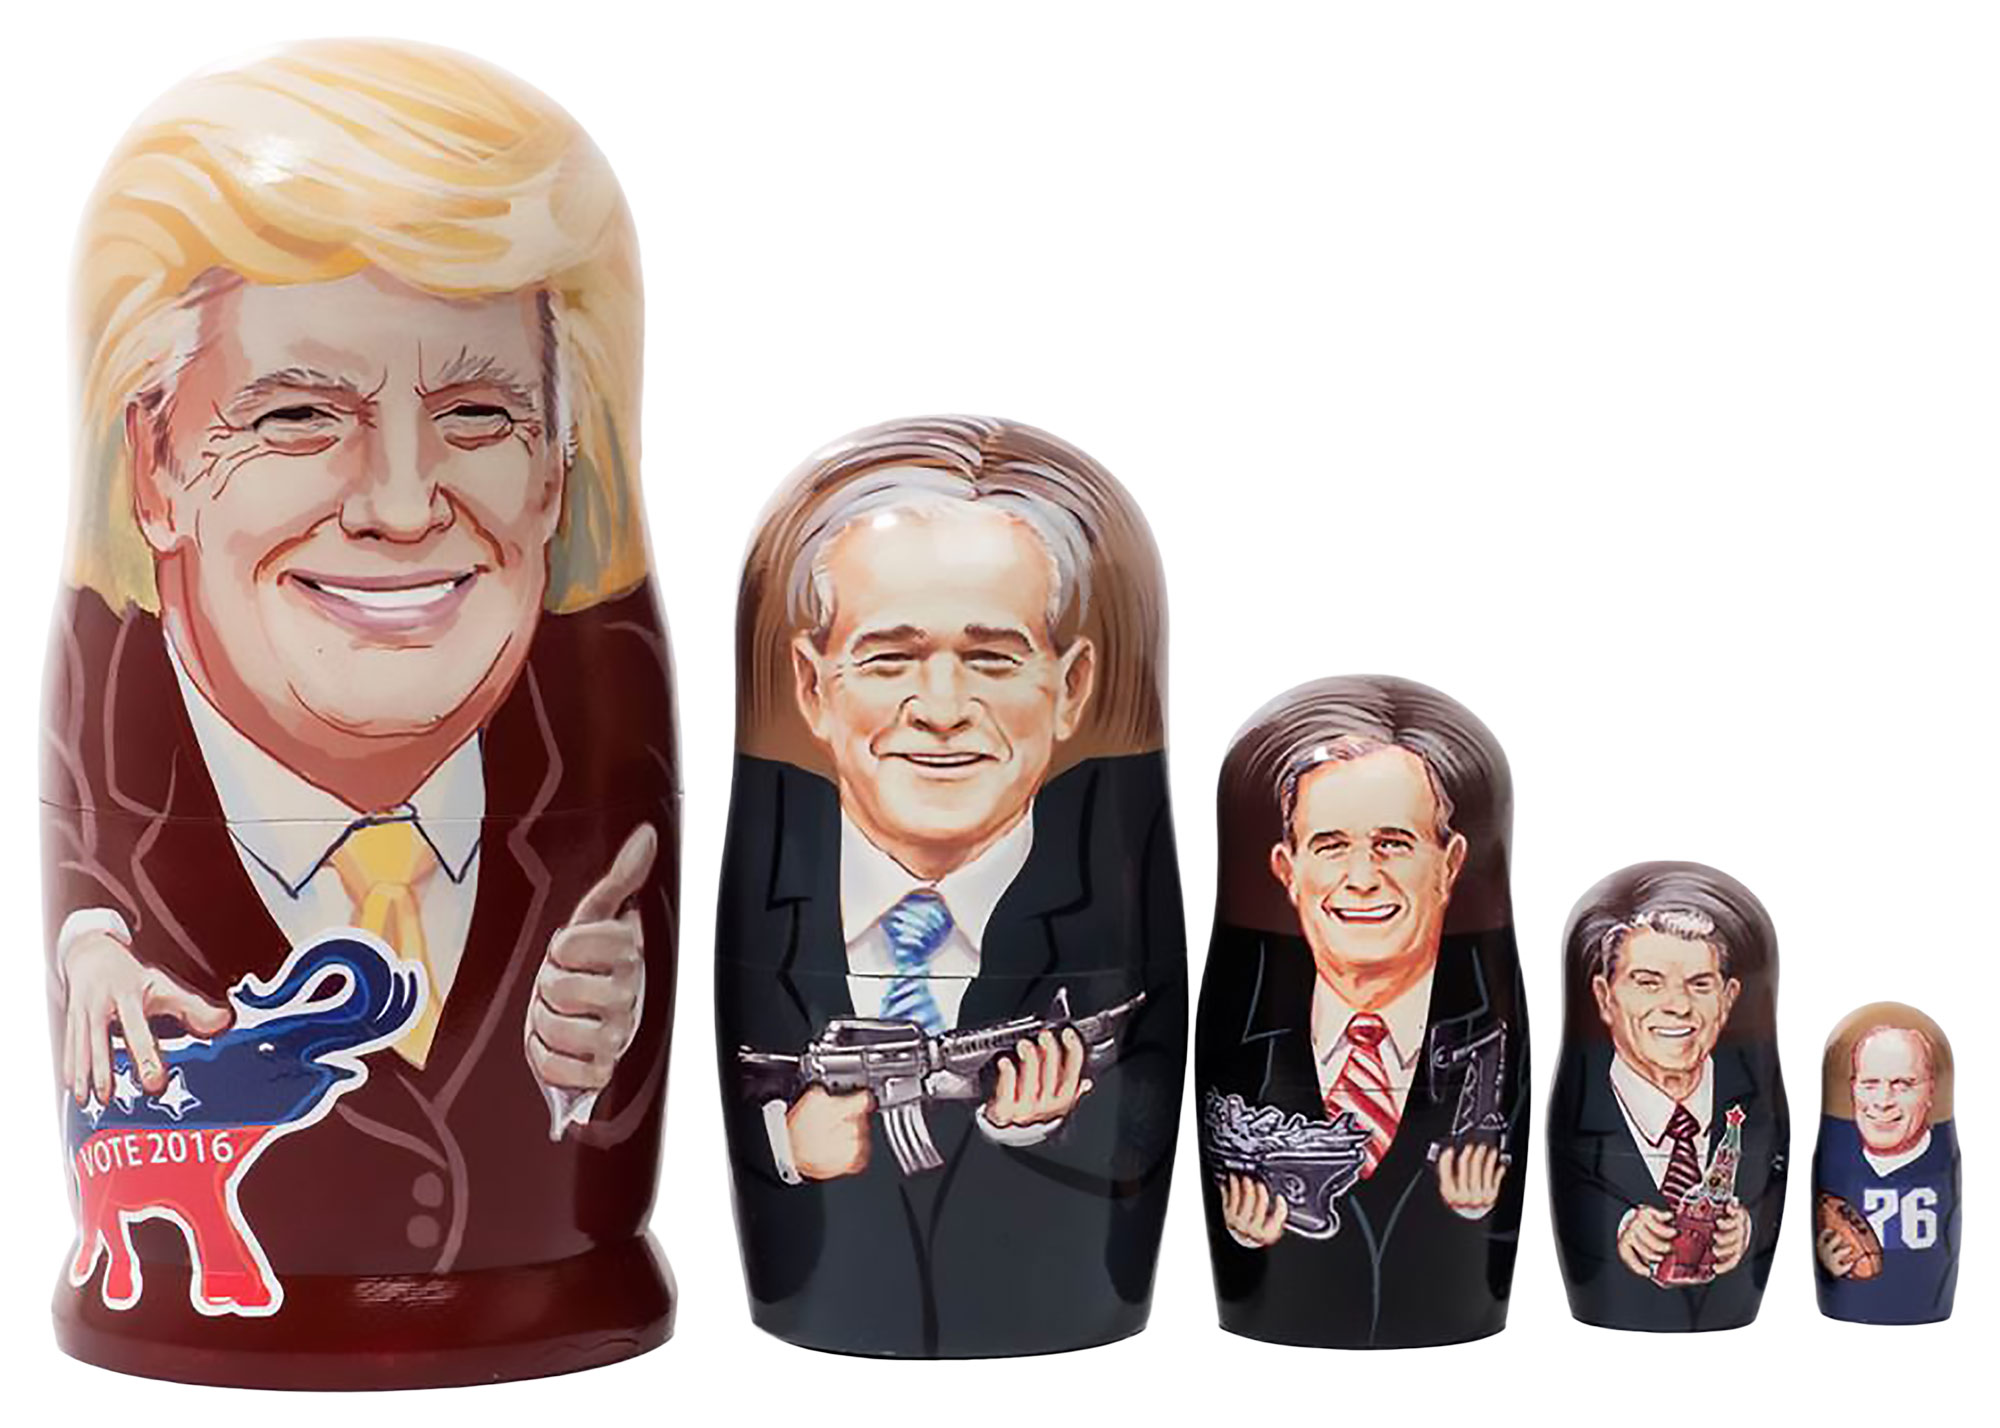 5pcs Handmade Russian Nesting Doll of President Trump & Family 4.25 inches tall 